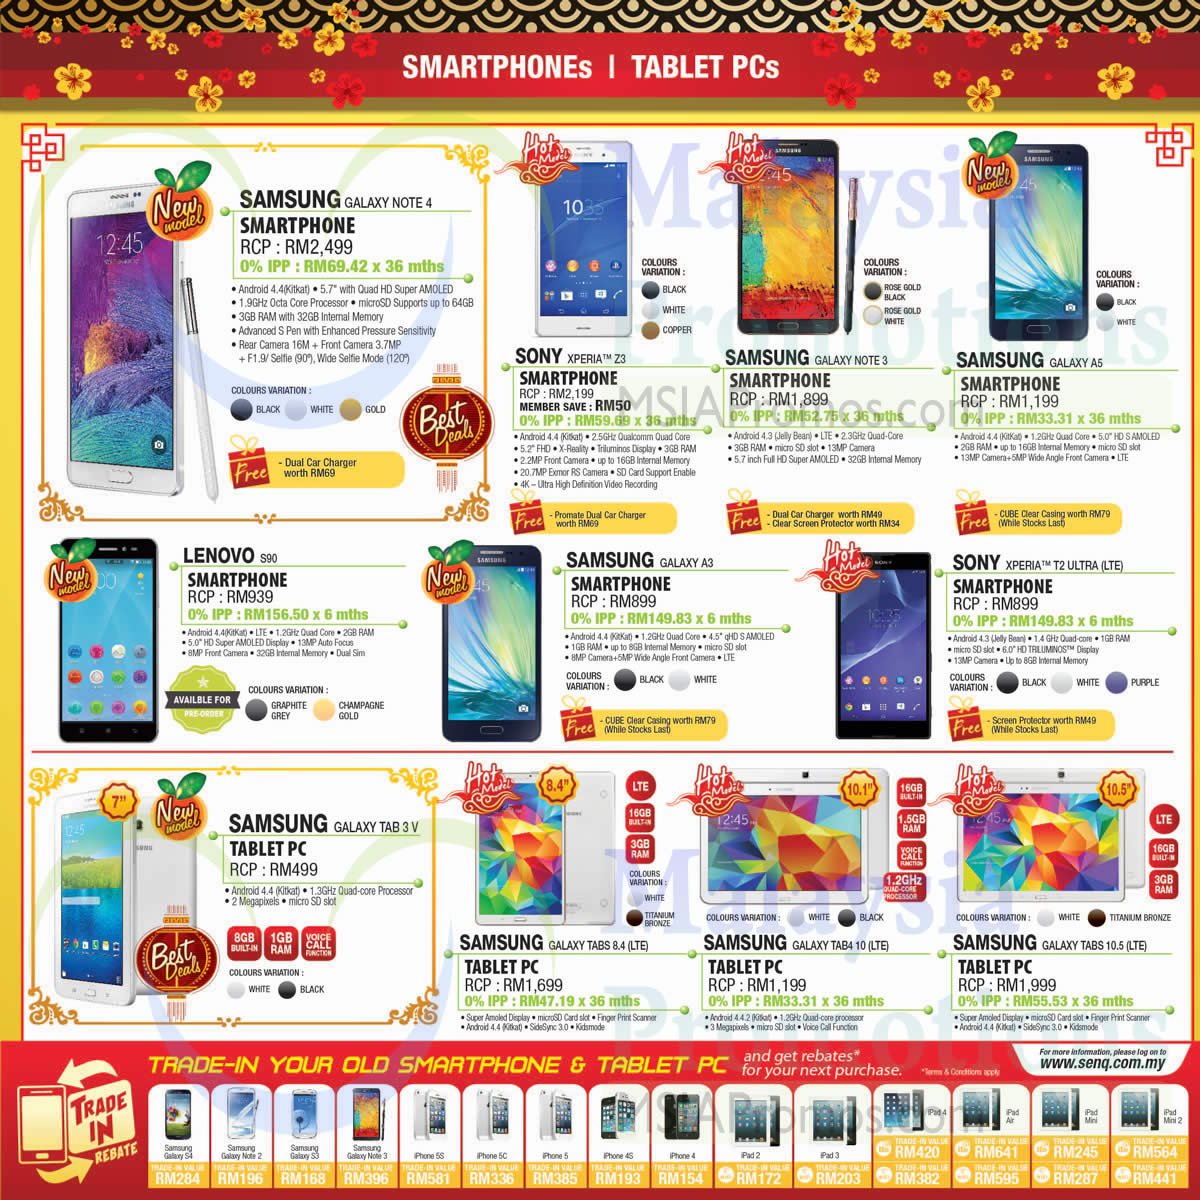 Featured image for SenQ Notebooks, Digital Cameras, Home Appliances, TVs & Phones Offers 1 - 28 Feb 2015